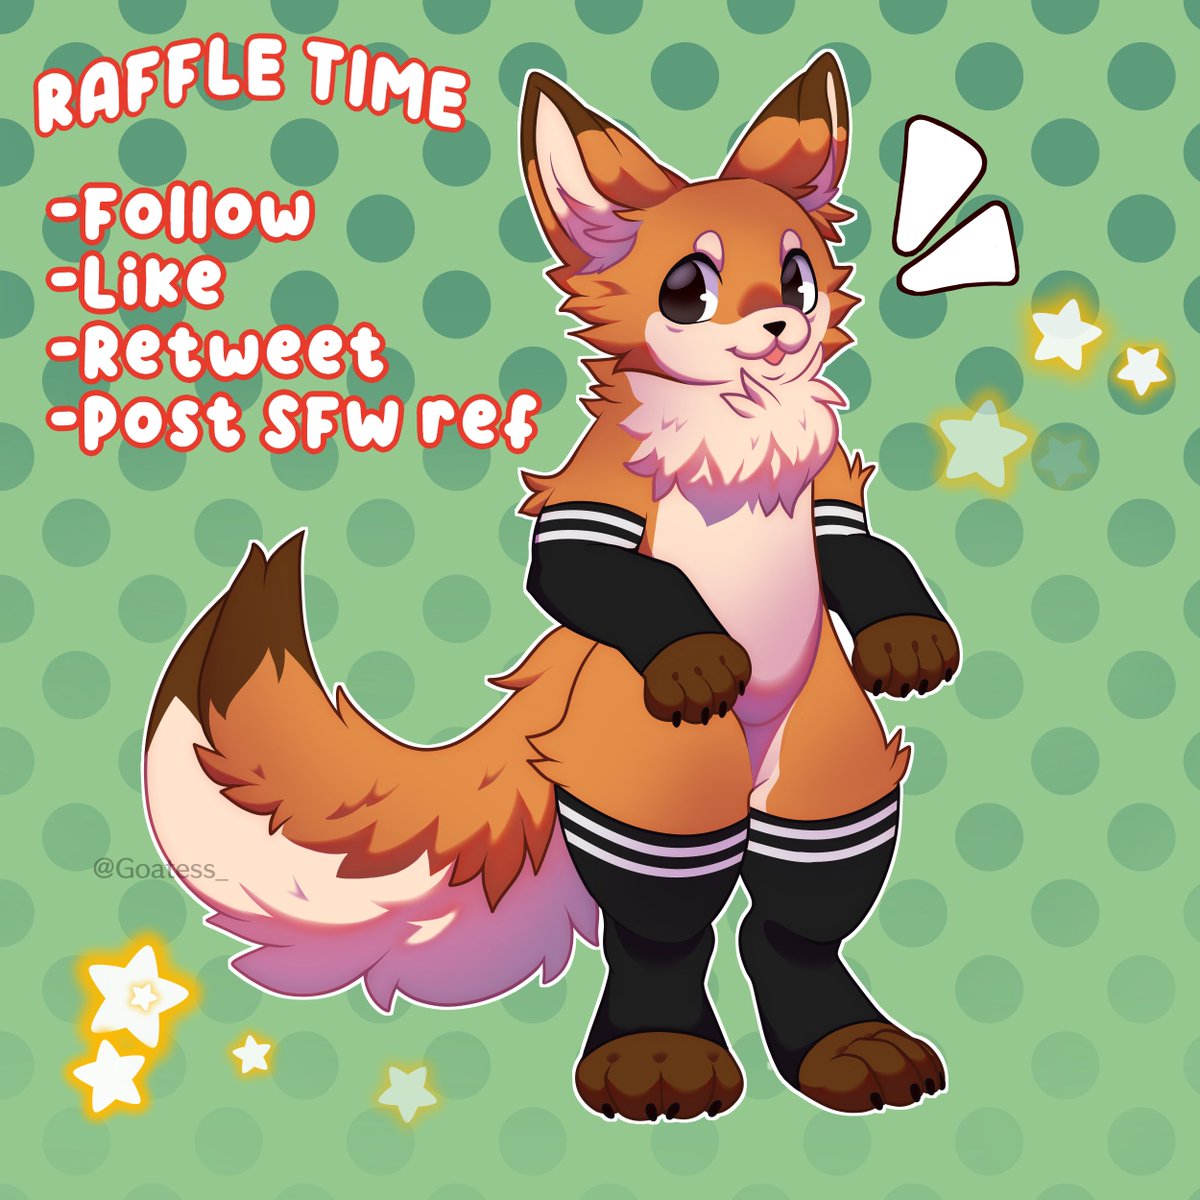 ⭐RAFFLE TIME⭐ Decided to FINALLY host a raffle here! Winner gets a fully shaded chibi (like below) RULES: -Follow me -Like -Retweet -Post a SFW Ref sheet ENDS on the 23rd GOOD LUCK!!! #furry #furryart